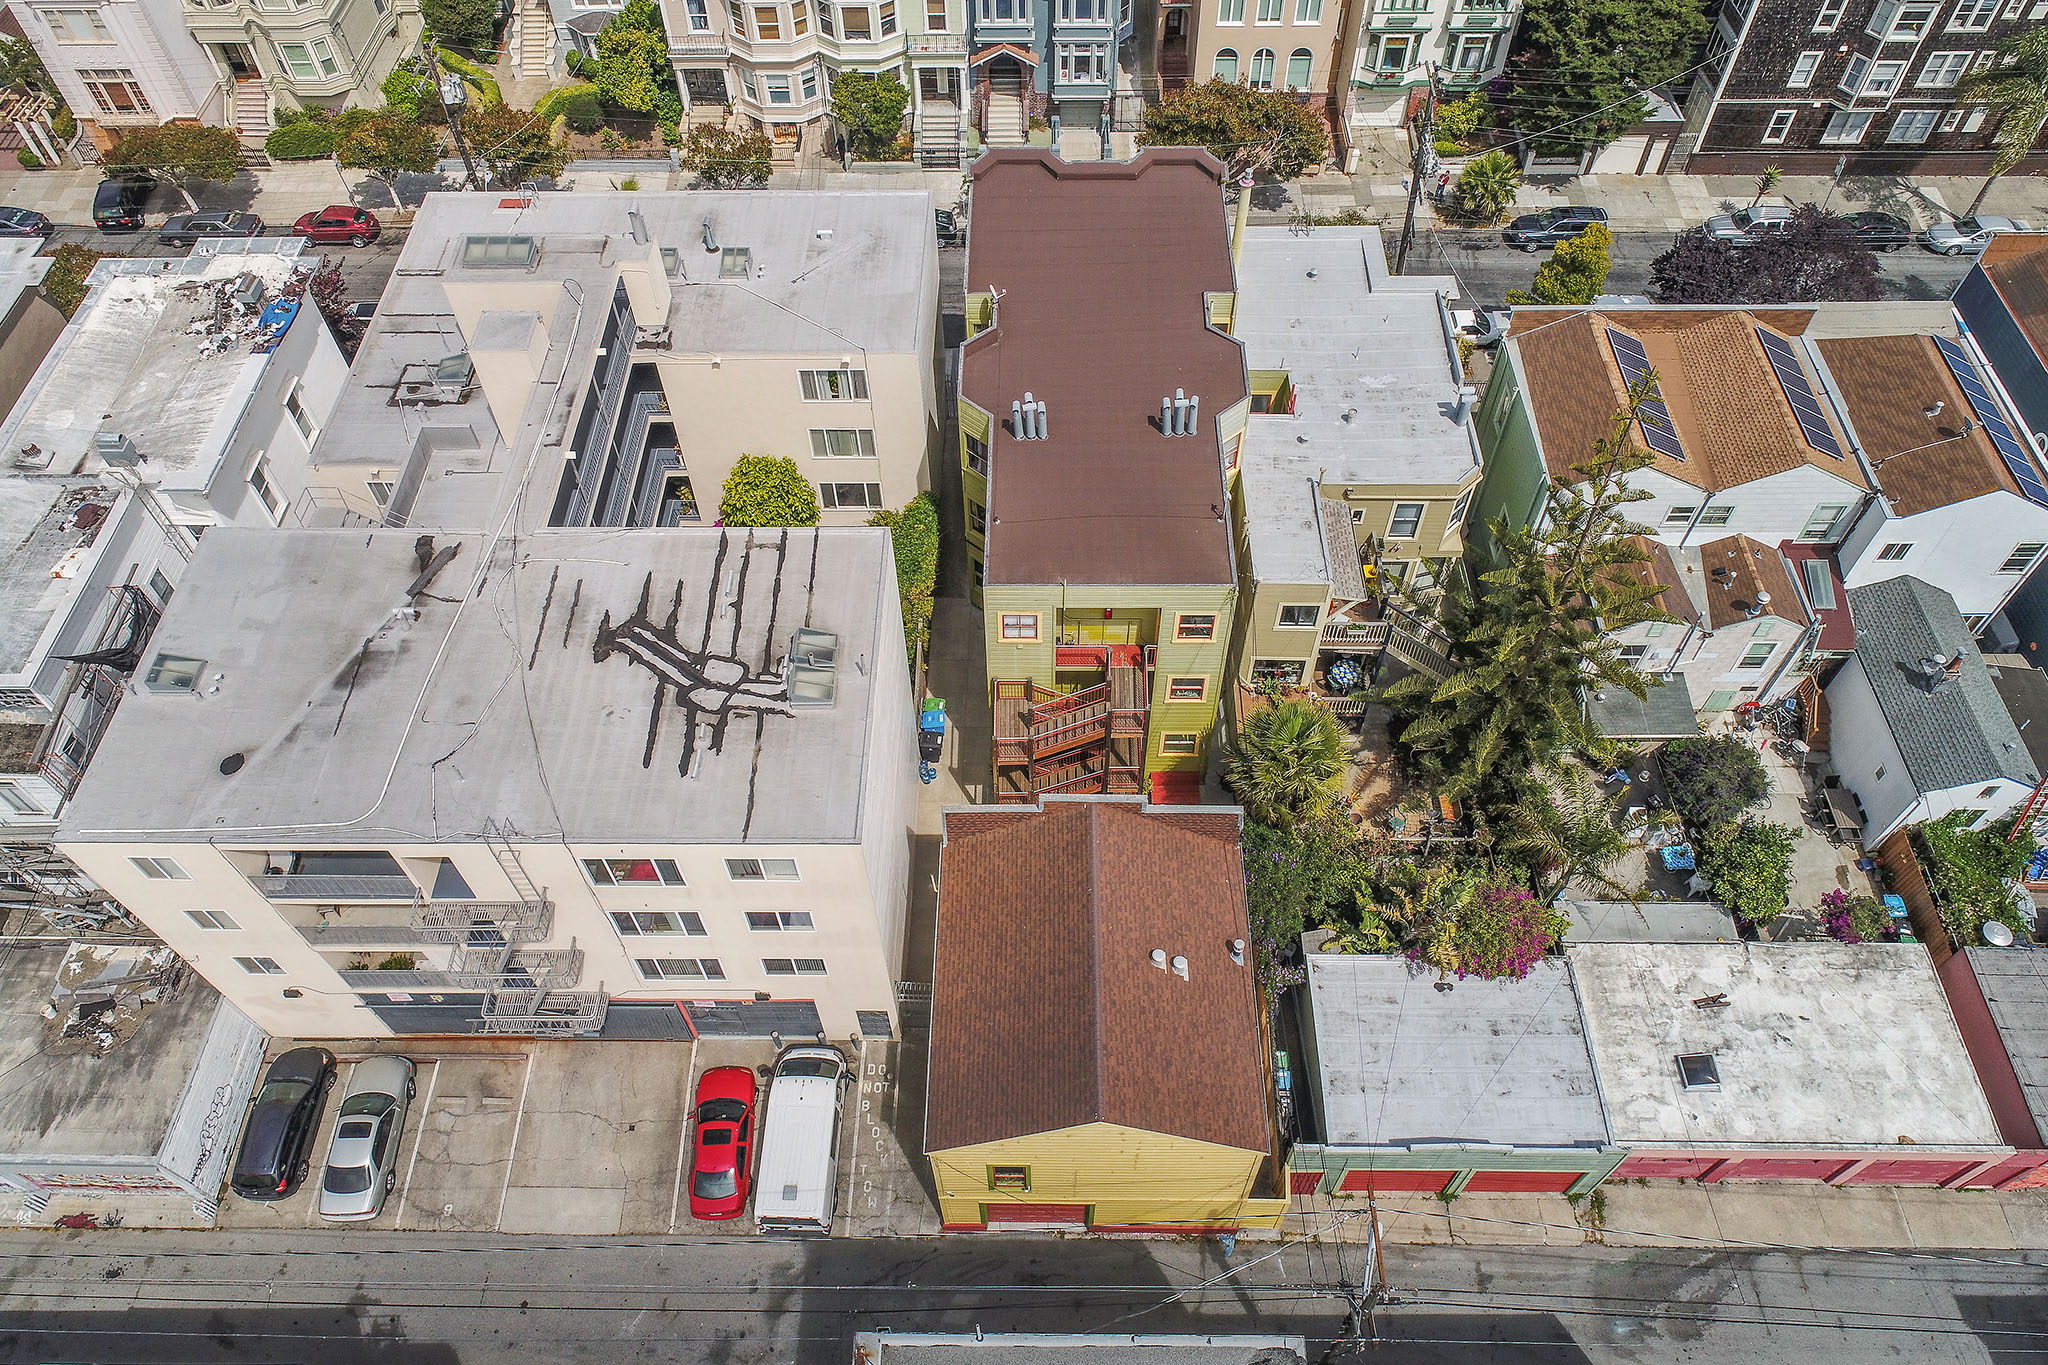 Property Photo: Aerial view of 464-468 Bartlett Street, showing the three story property and a single family residence on one lot